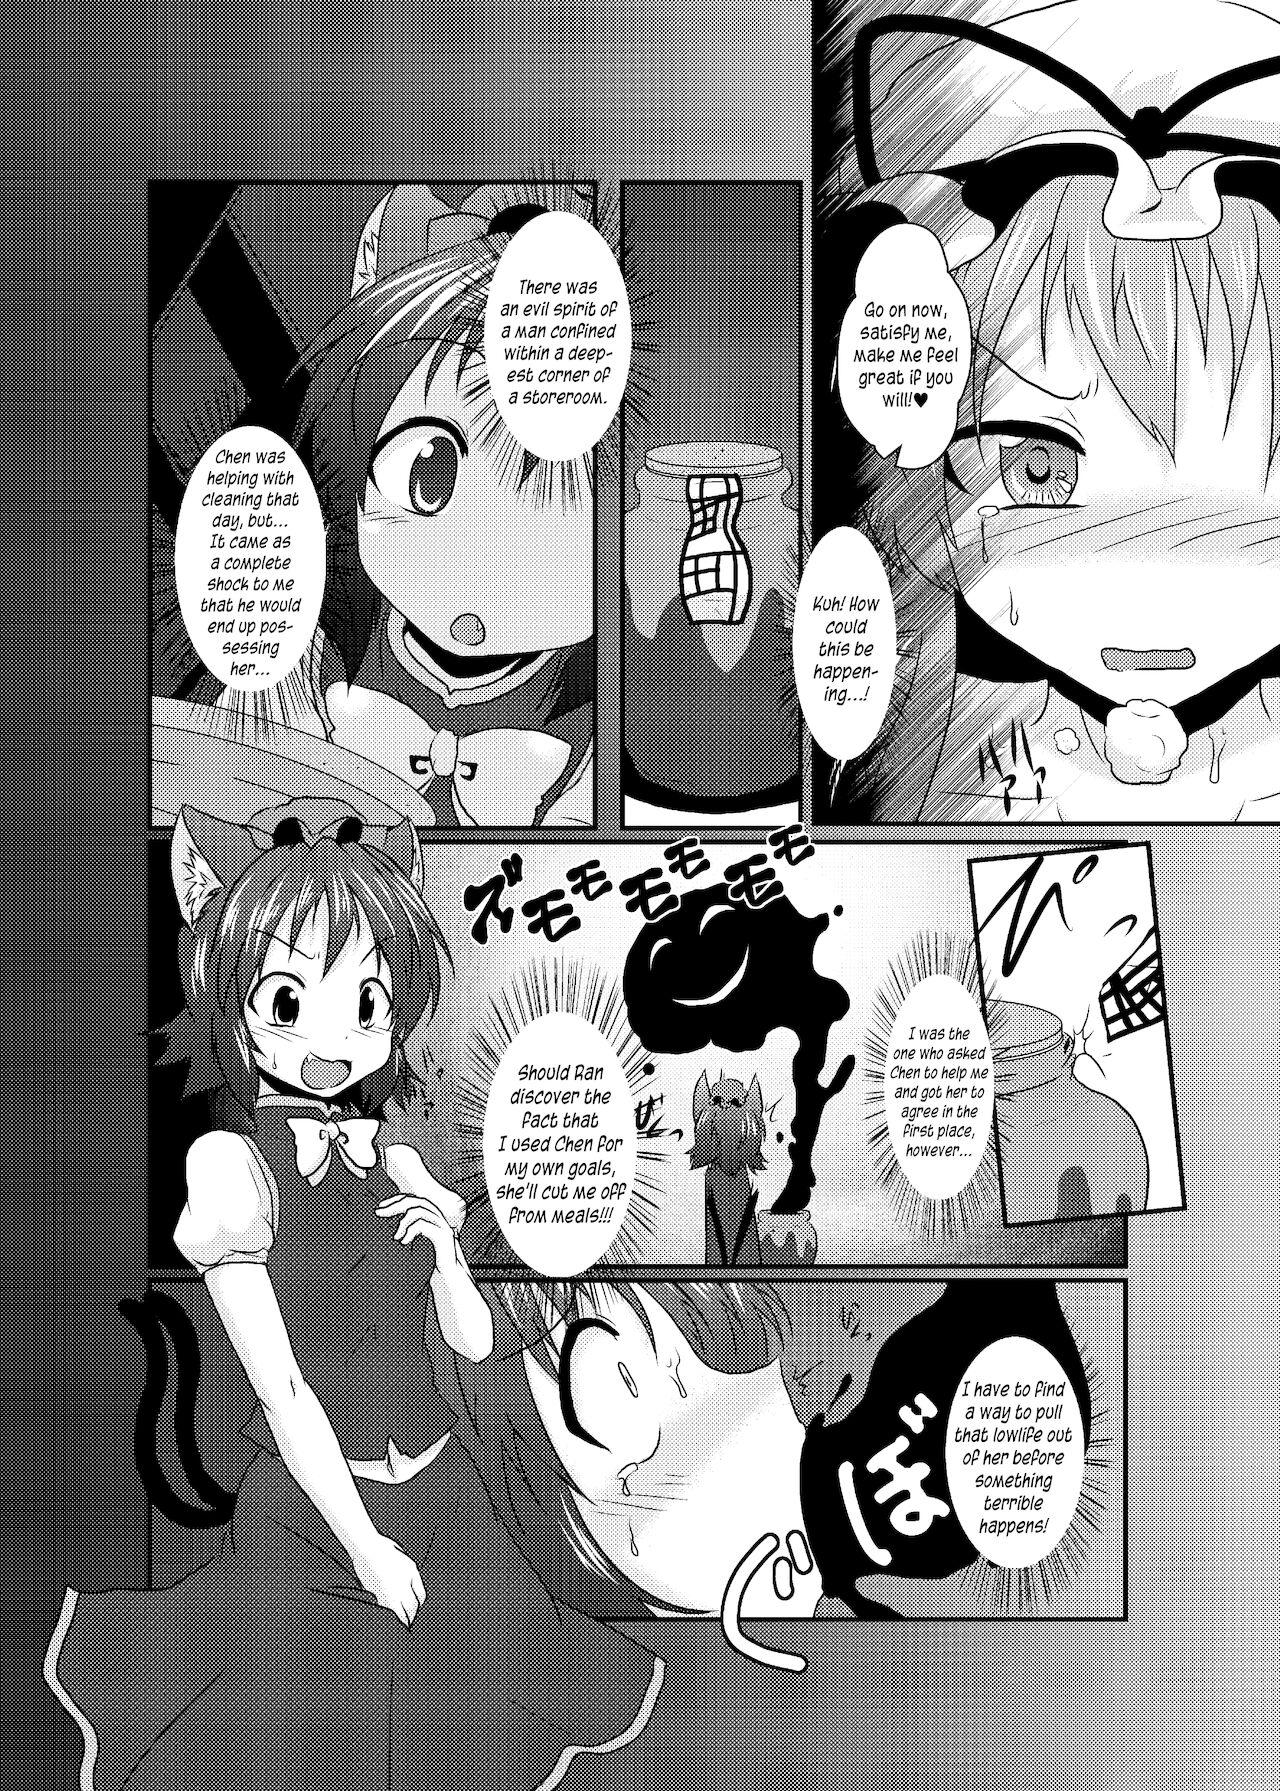 Asslick Chotto Tsukarechatta Mitai | I think I'm a little possessed! - Touhou project Foot Fetish - Page 4